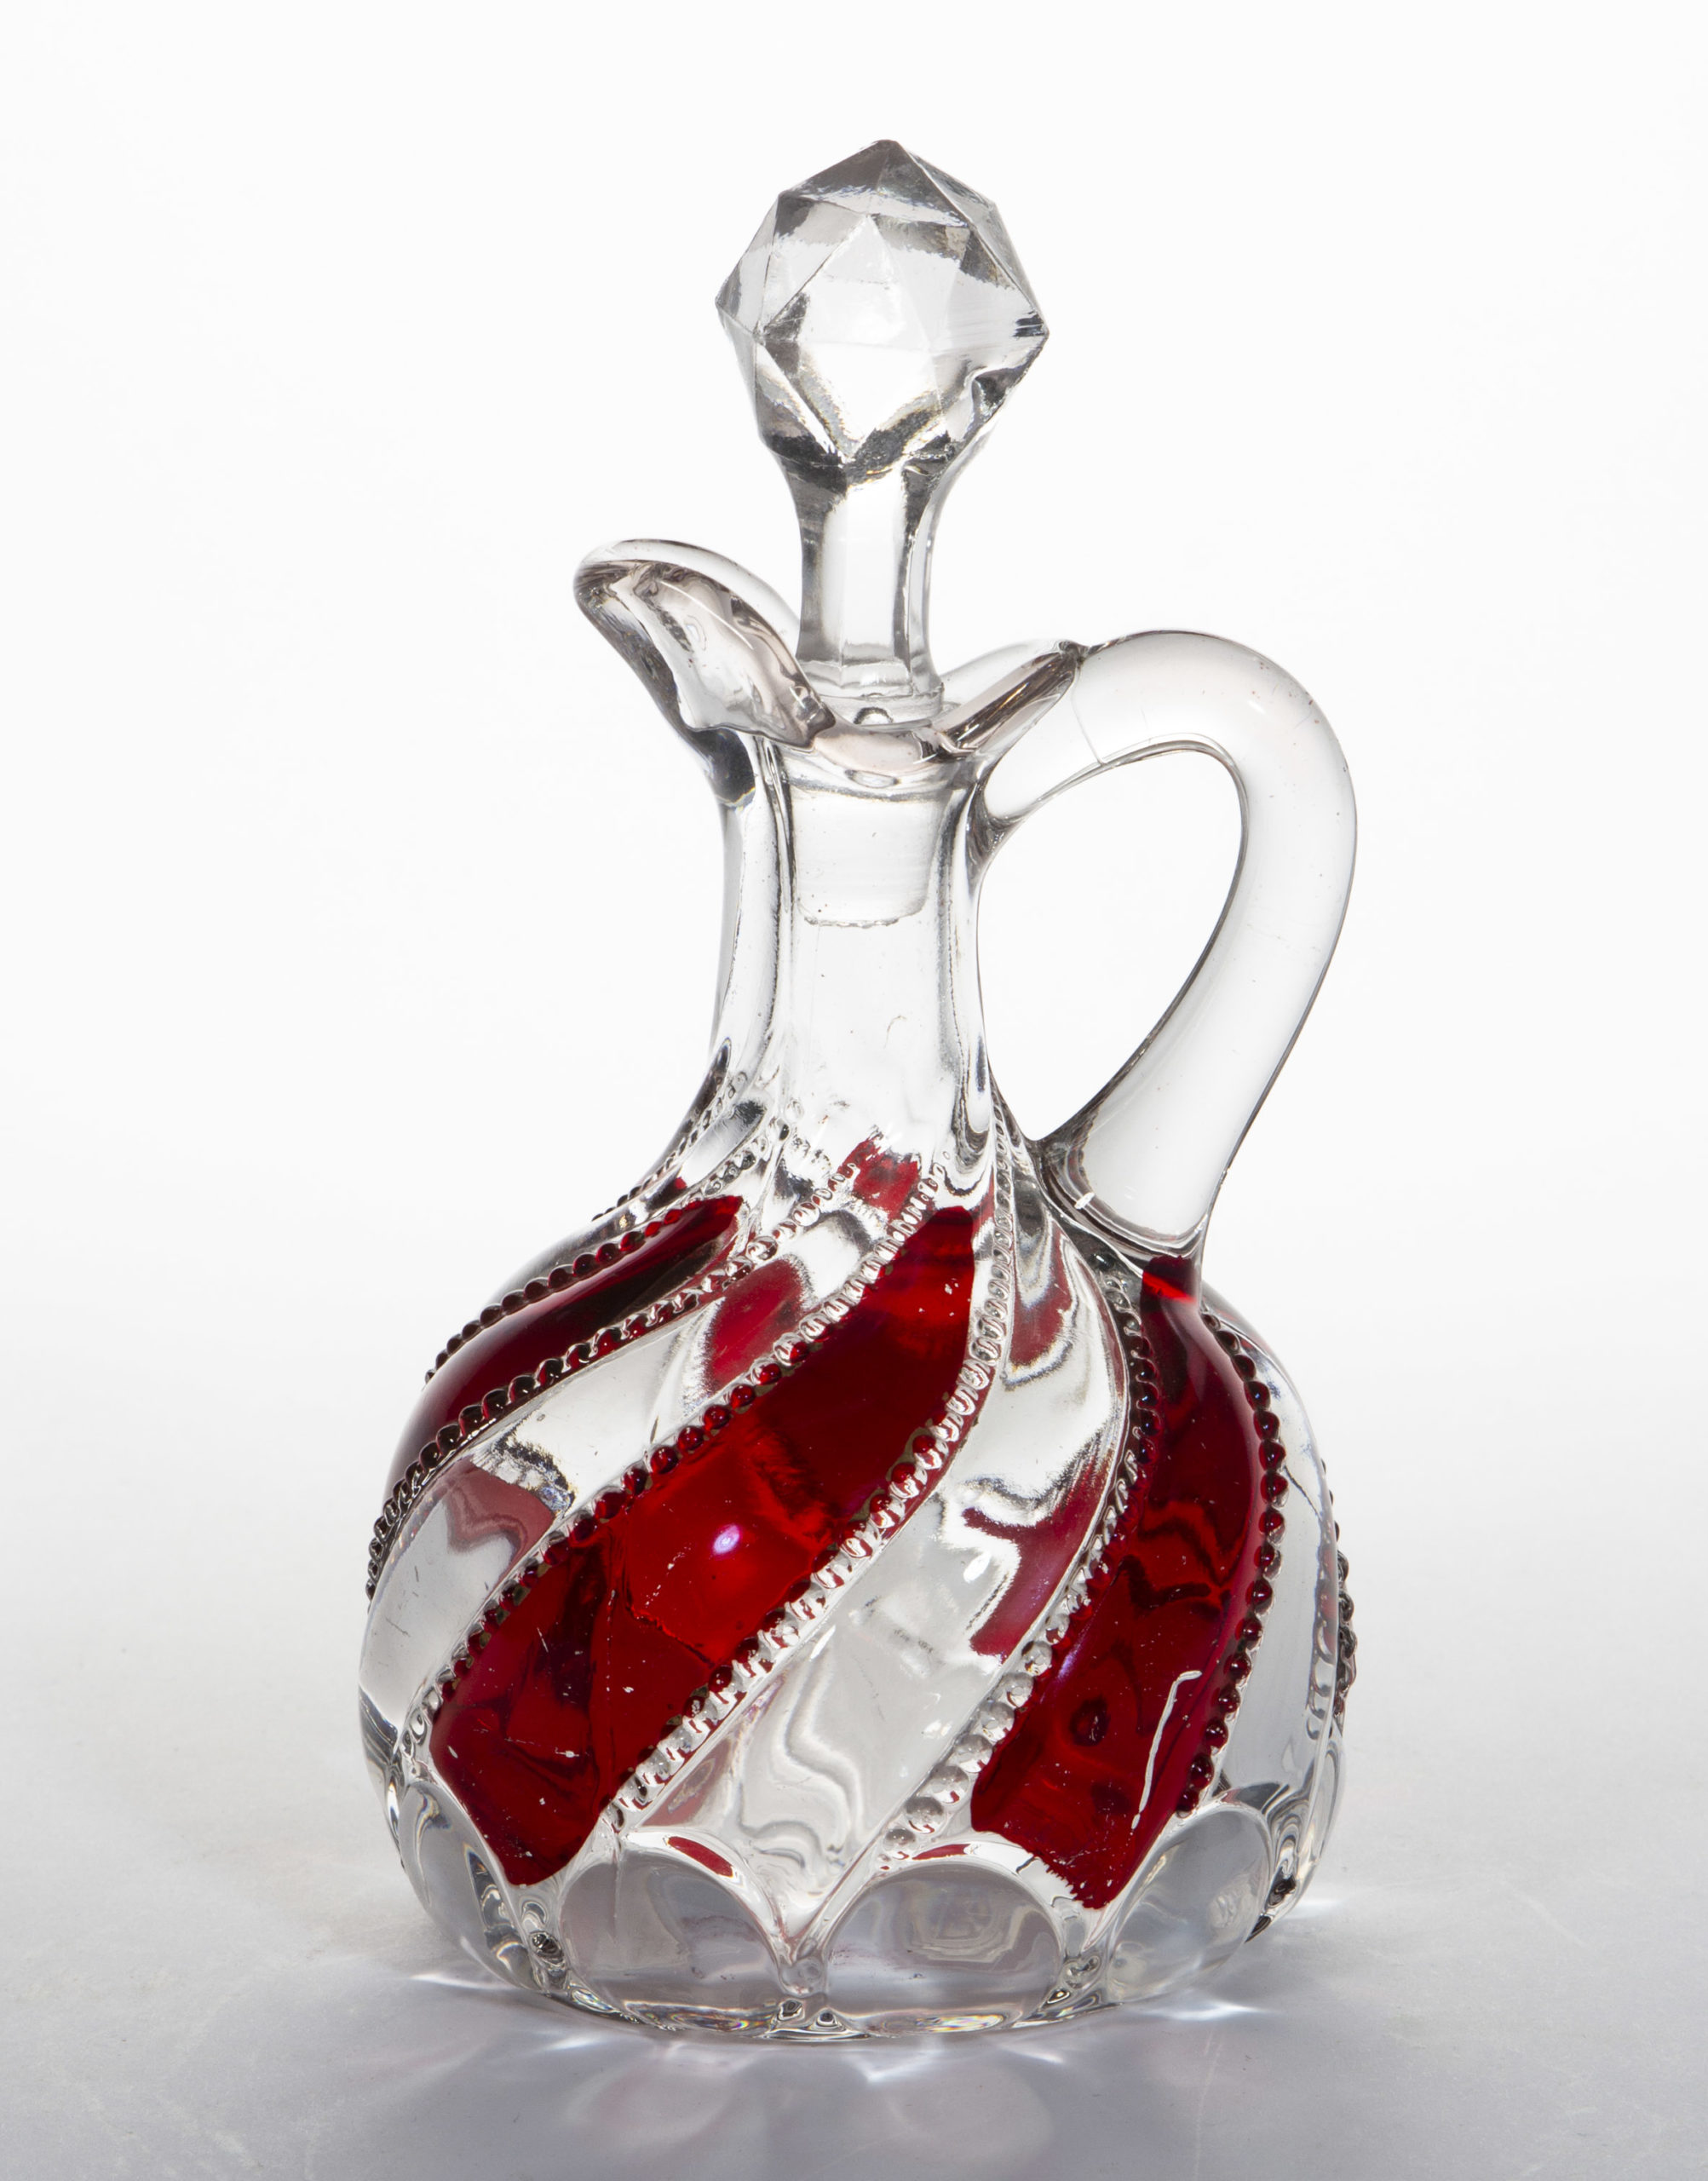 BEADED SWIRL WITH LENS – RUBY-STAINED CRUET,